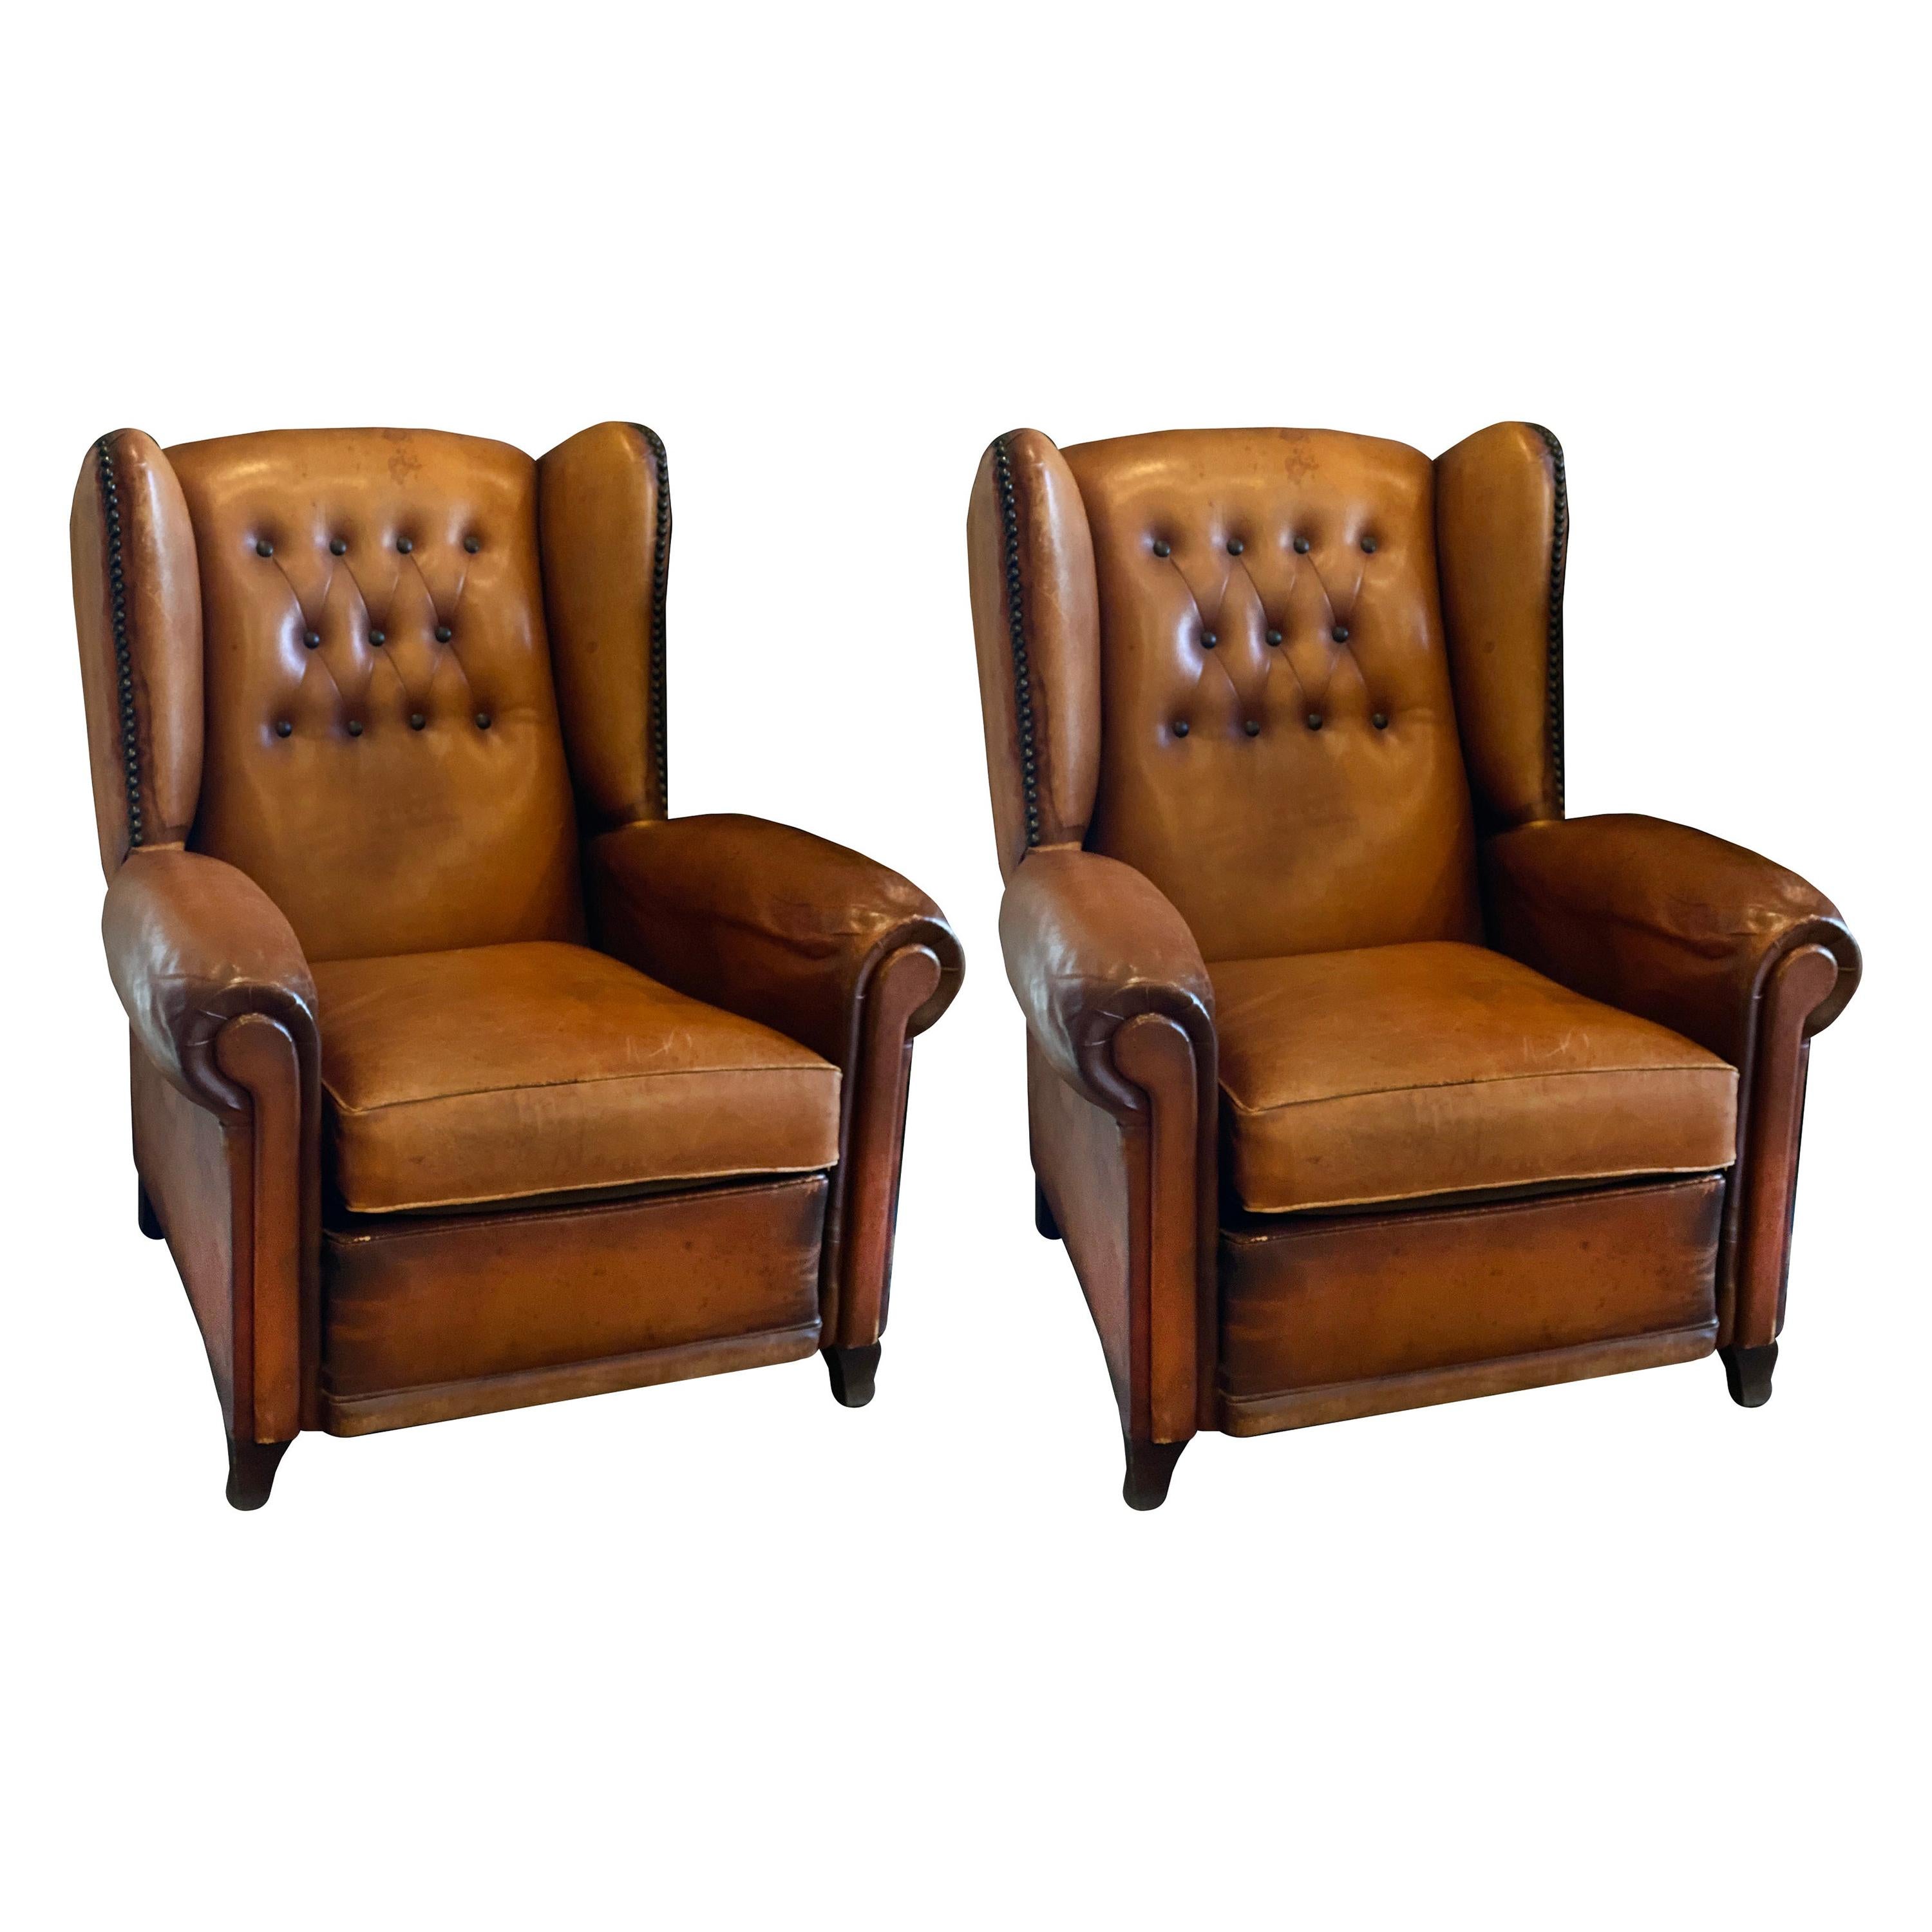 Club Chairs in Cognac Leather, France, 1930s